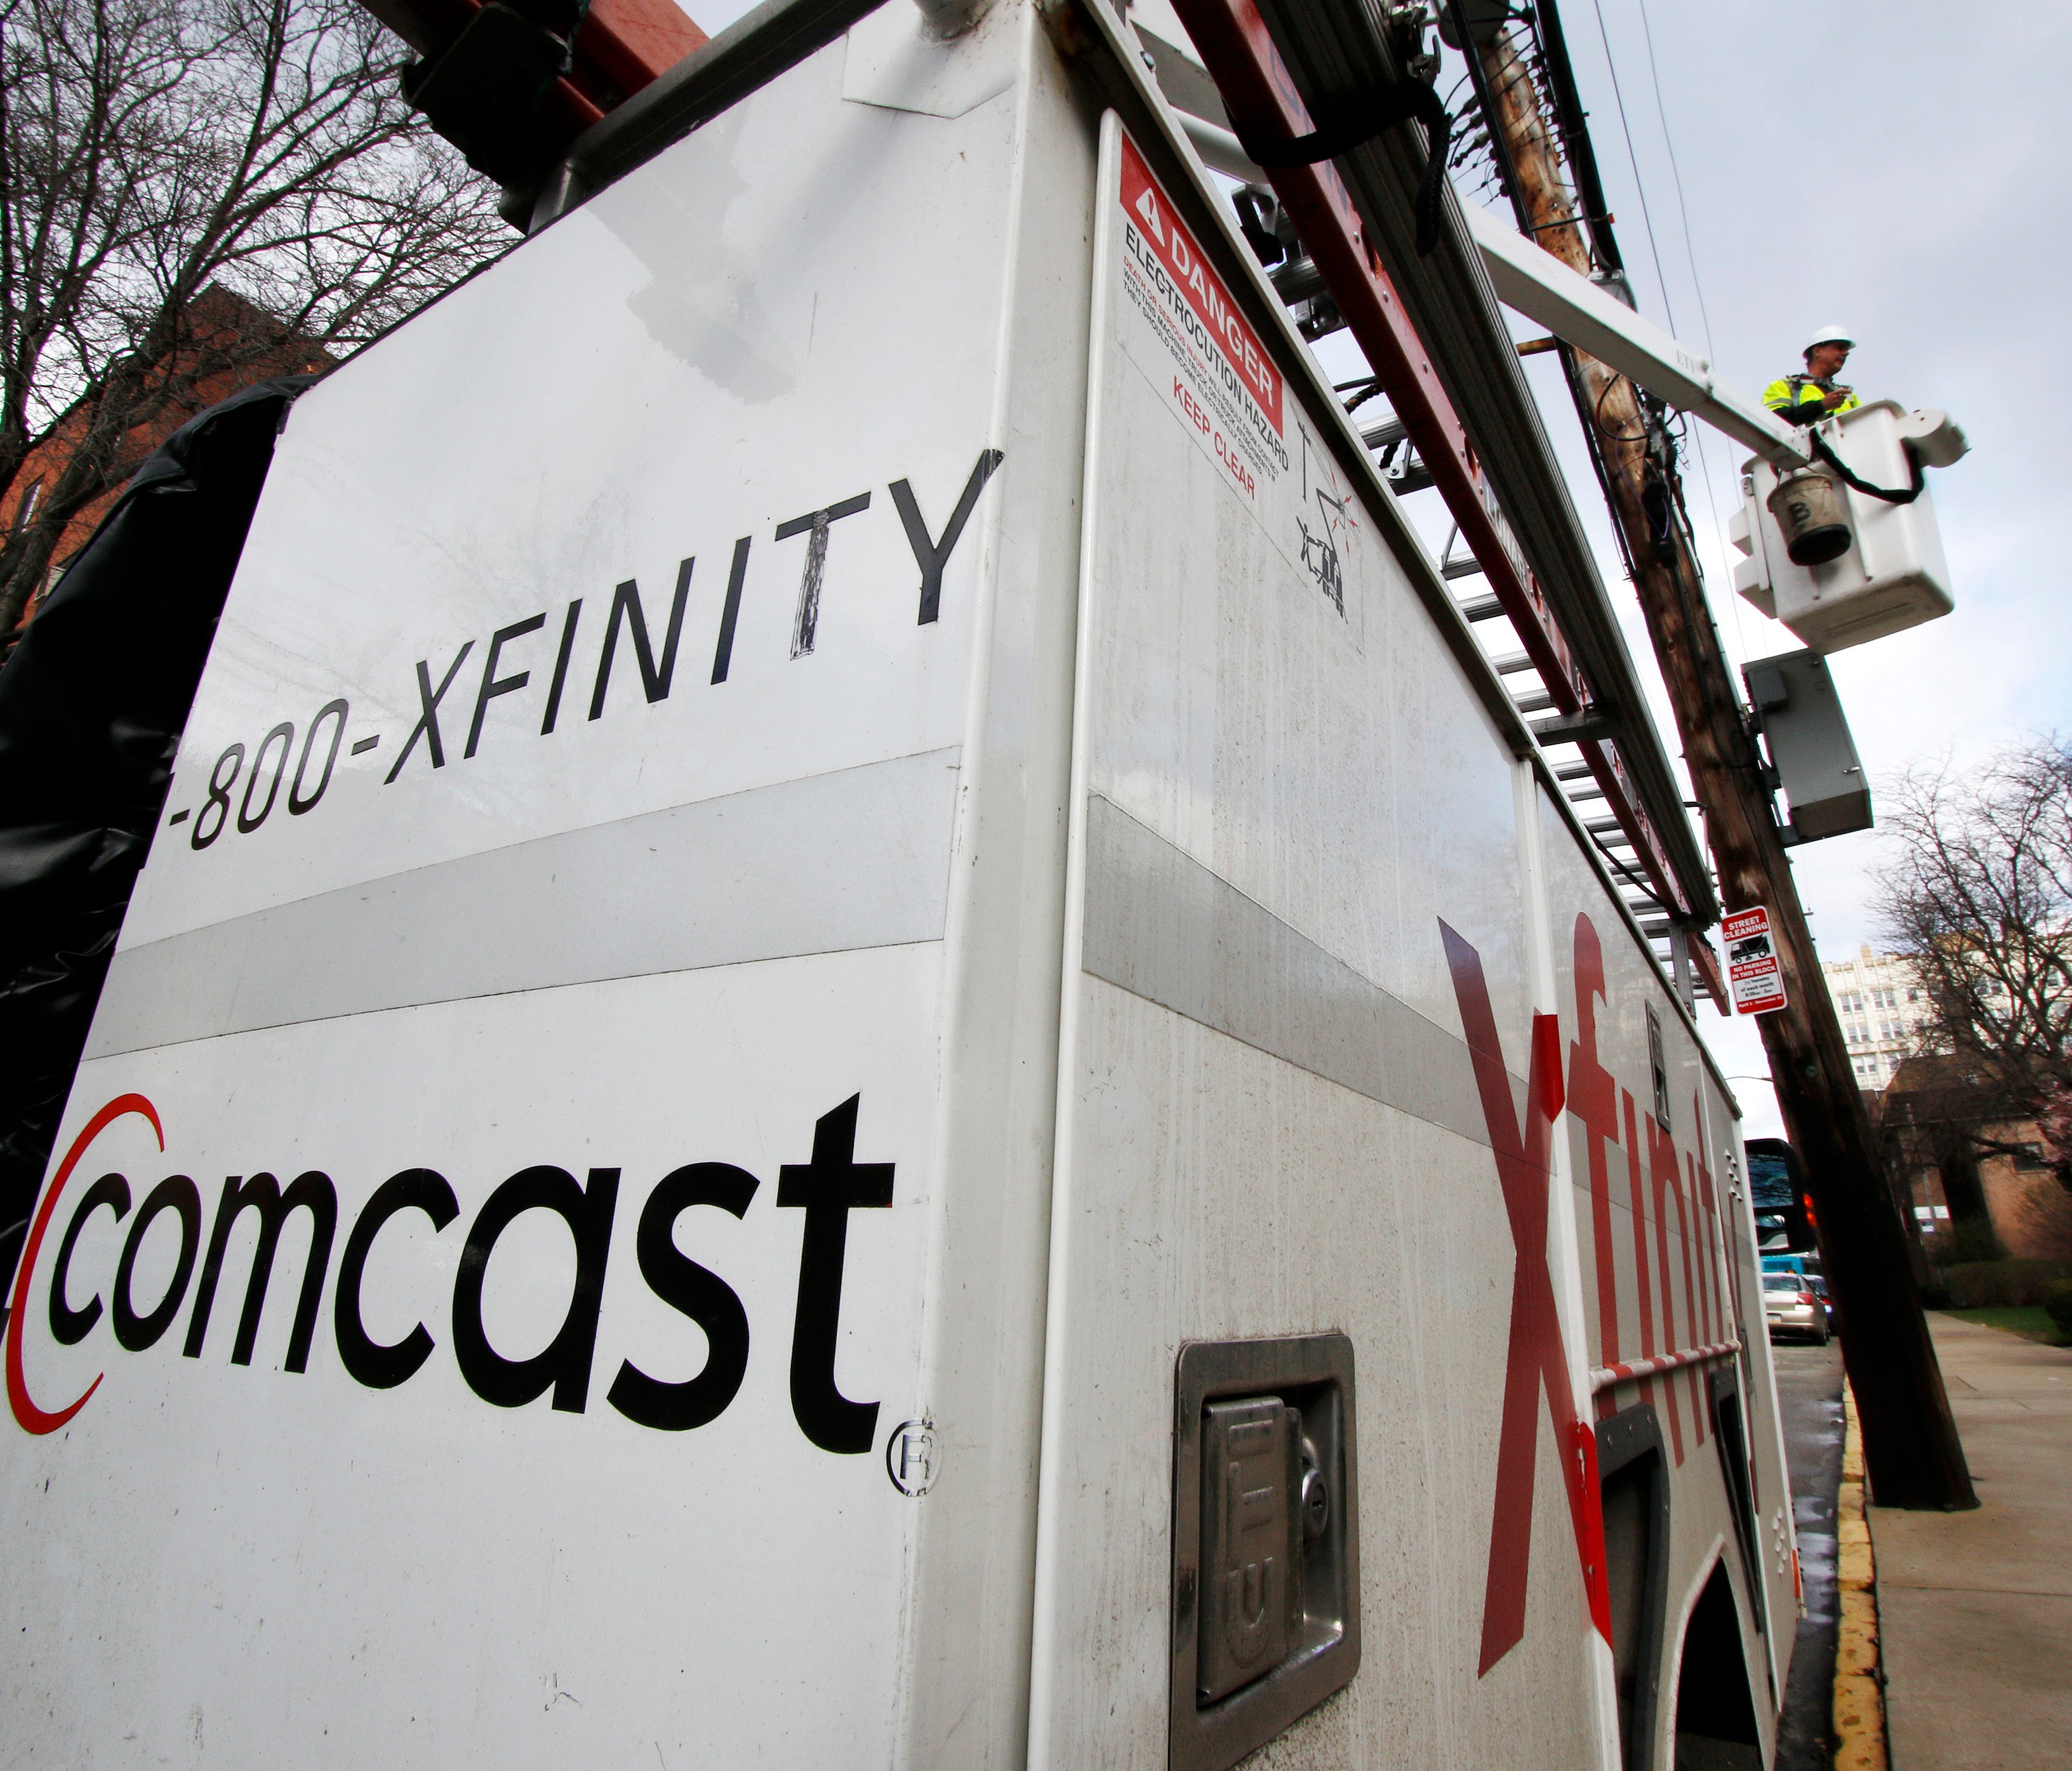 IFile photo taken in March 2017 shows a Comcast employee at work in Pittsburgh, Pa.